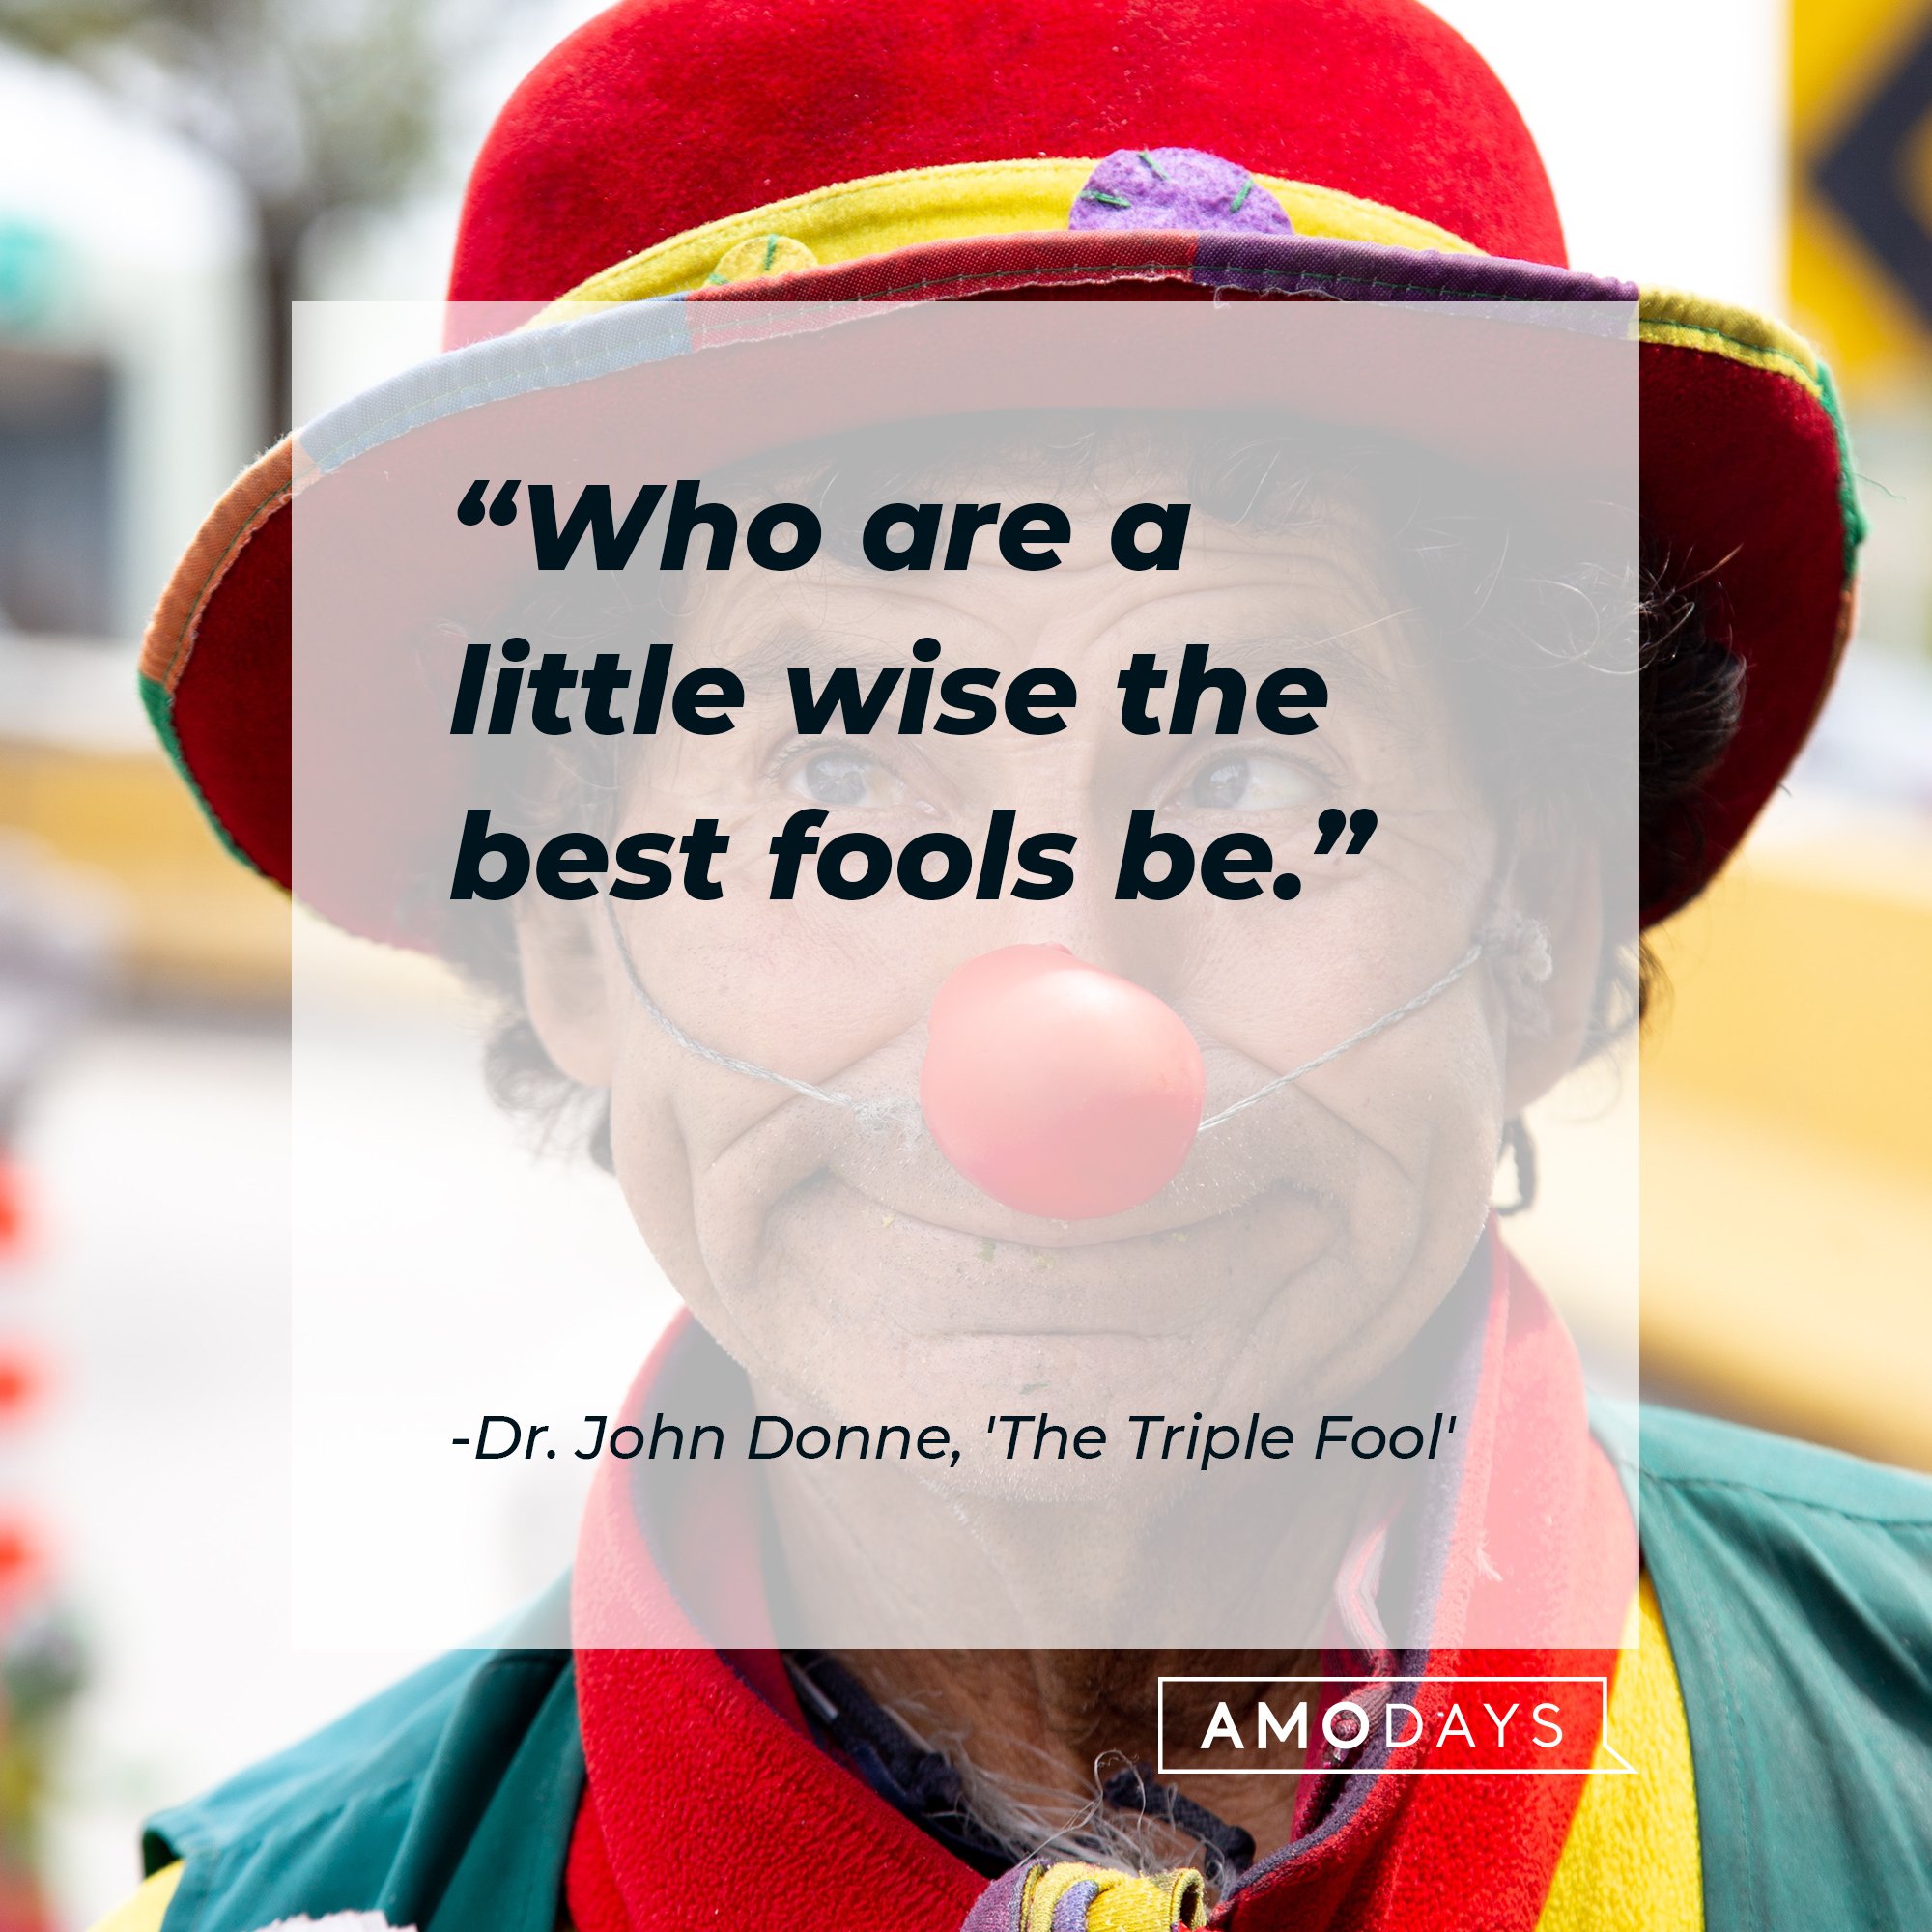 Dr. John Donne's quote "Who are a little wise the best fools be." | Source: Unsplash.com